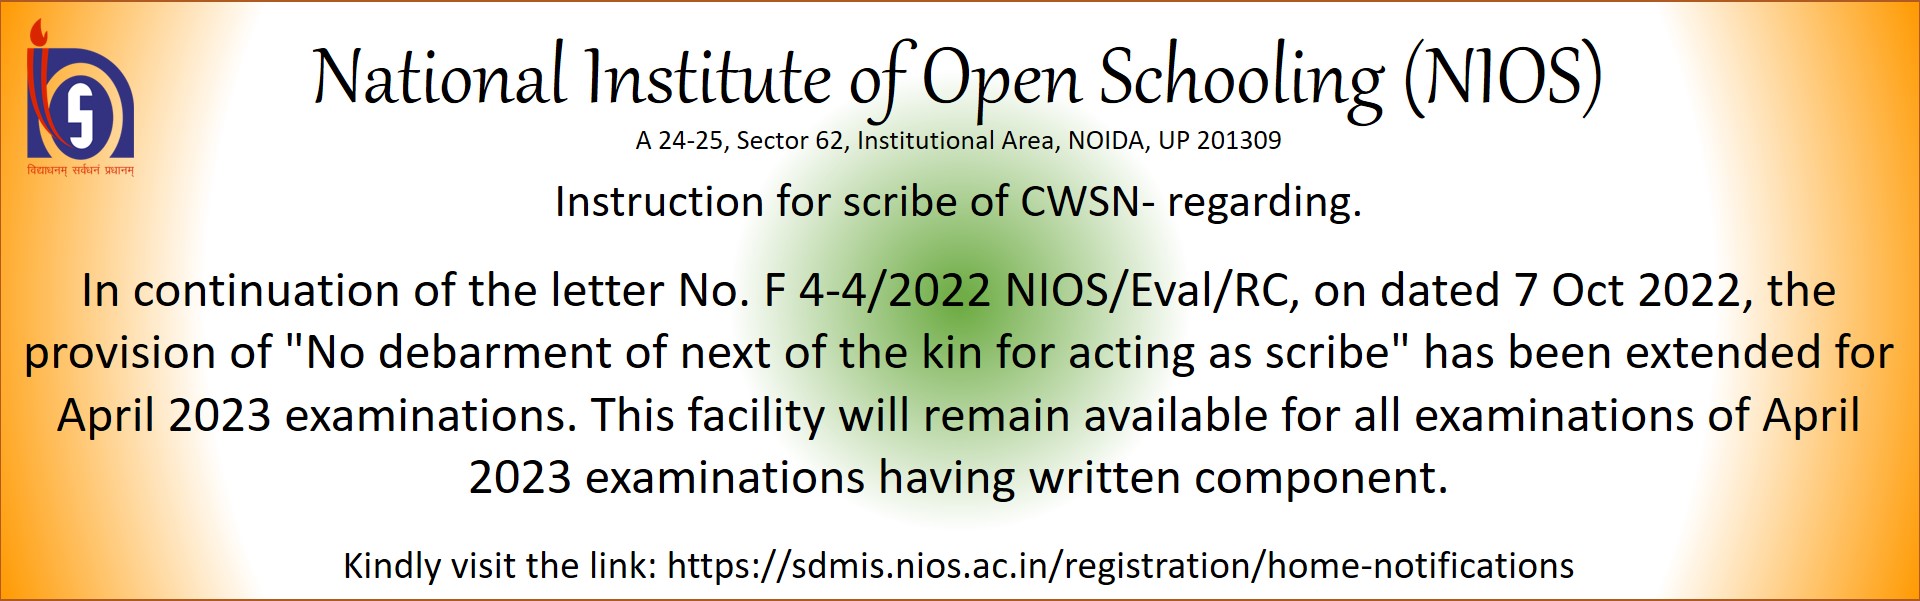 nios submission of assignment